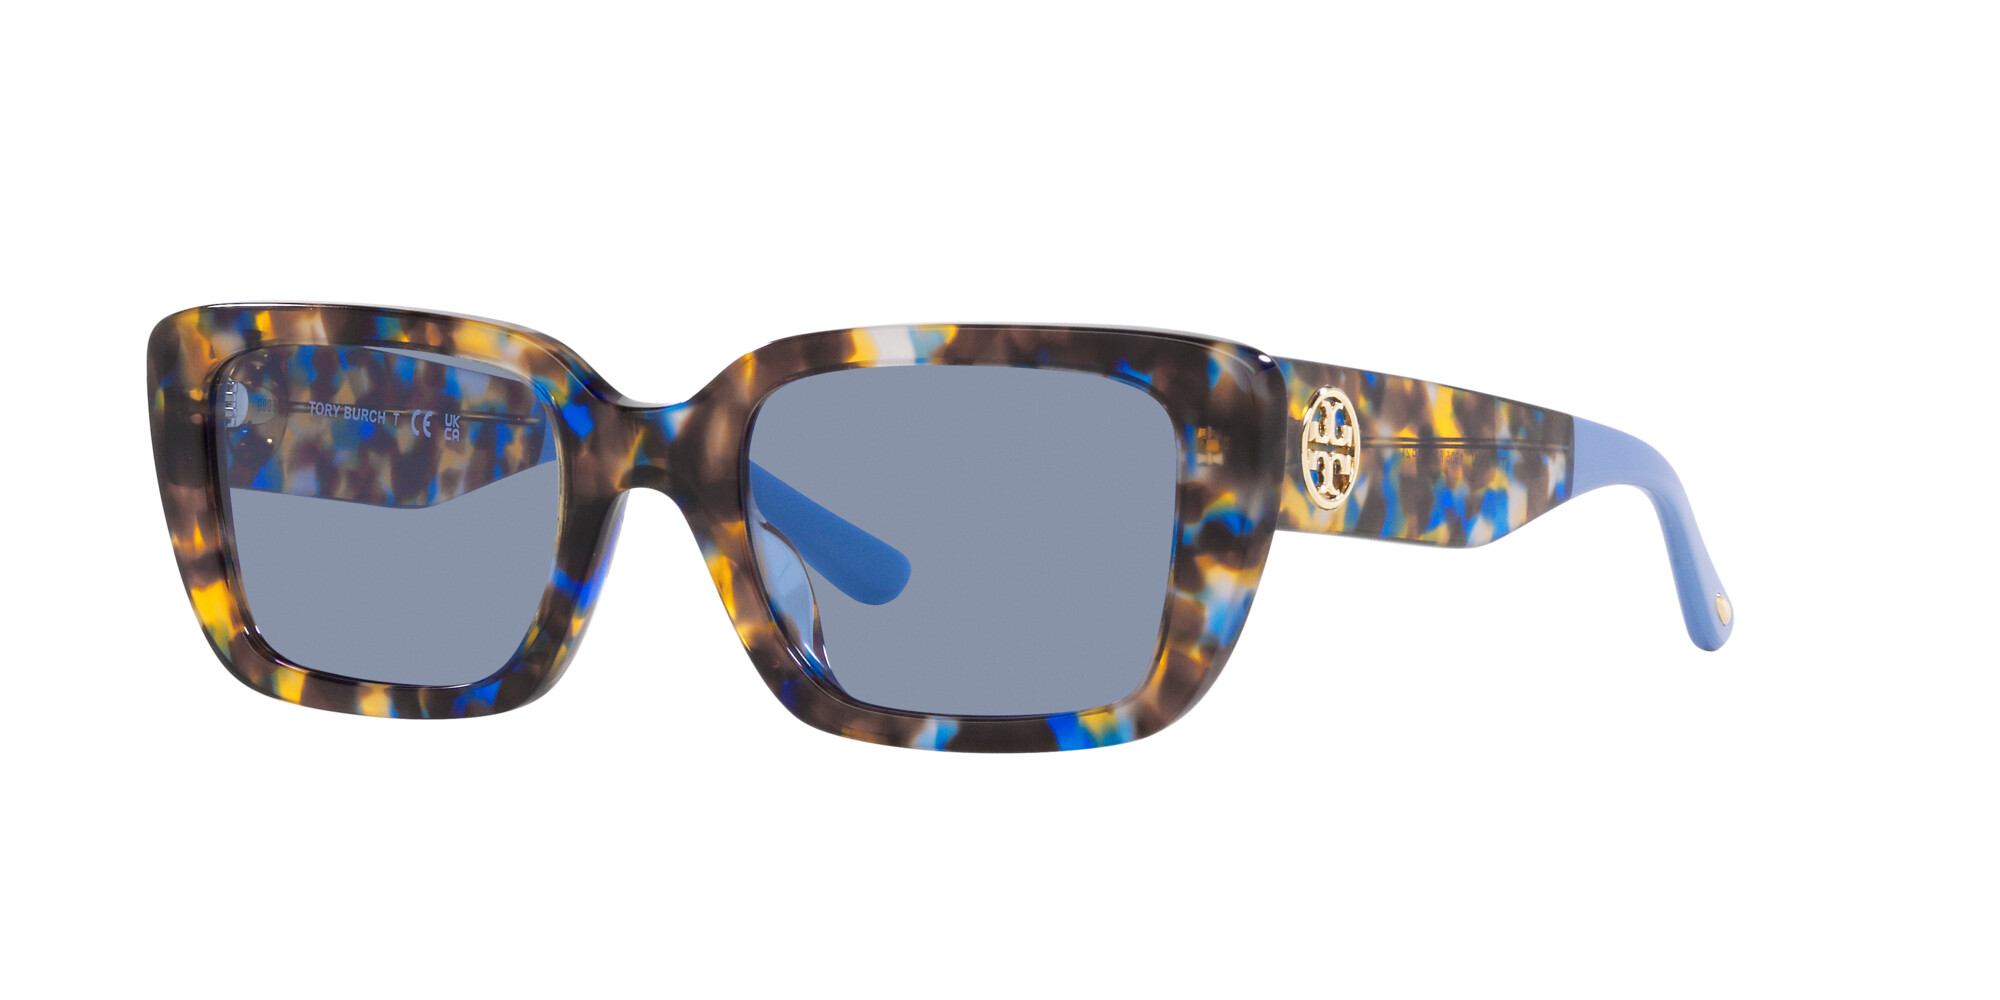 [products.image.angle_left01] Tory Burch 0TY7190U 190580 Sonnenbrille